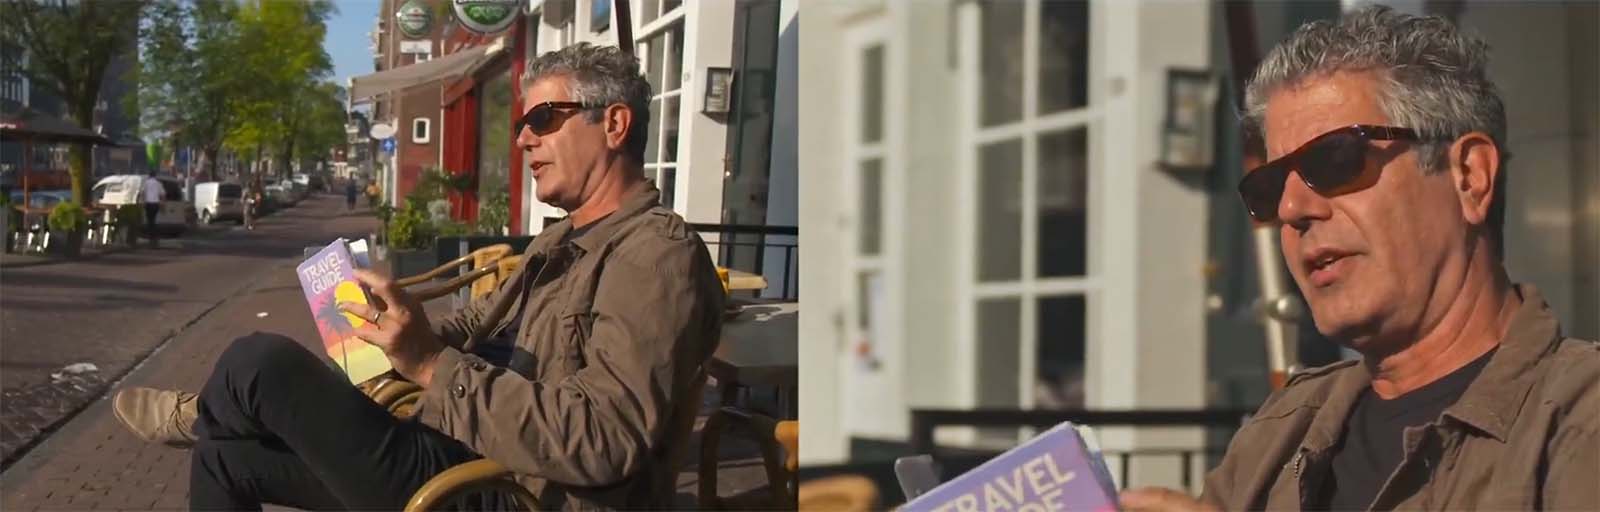 Using split-screen to emphasise Anthony Bourdain’s playful side. Image © Focus Features